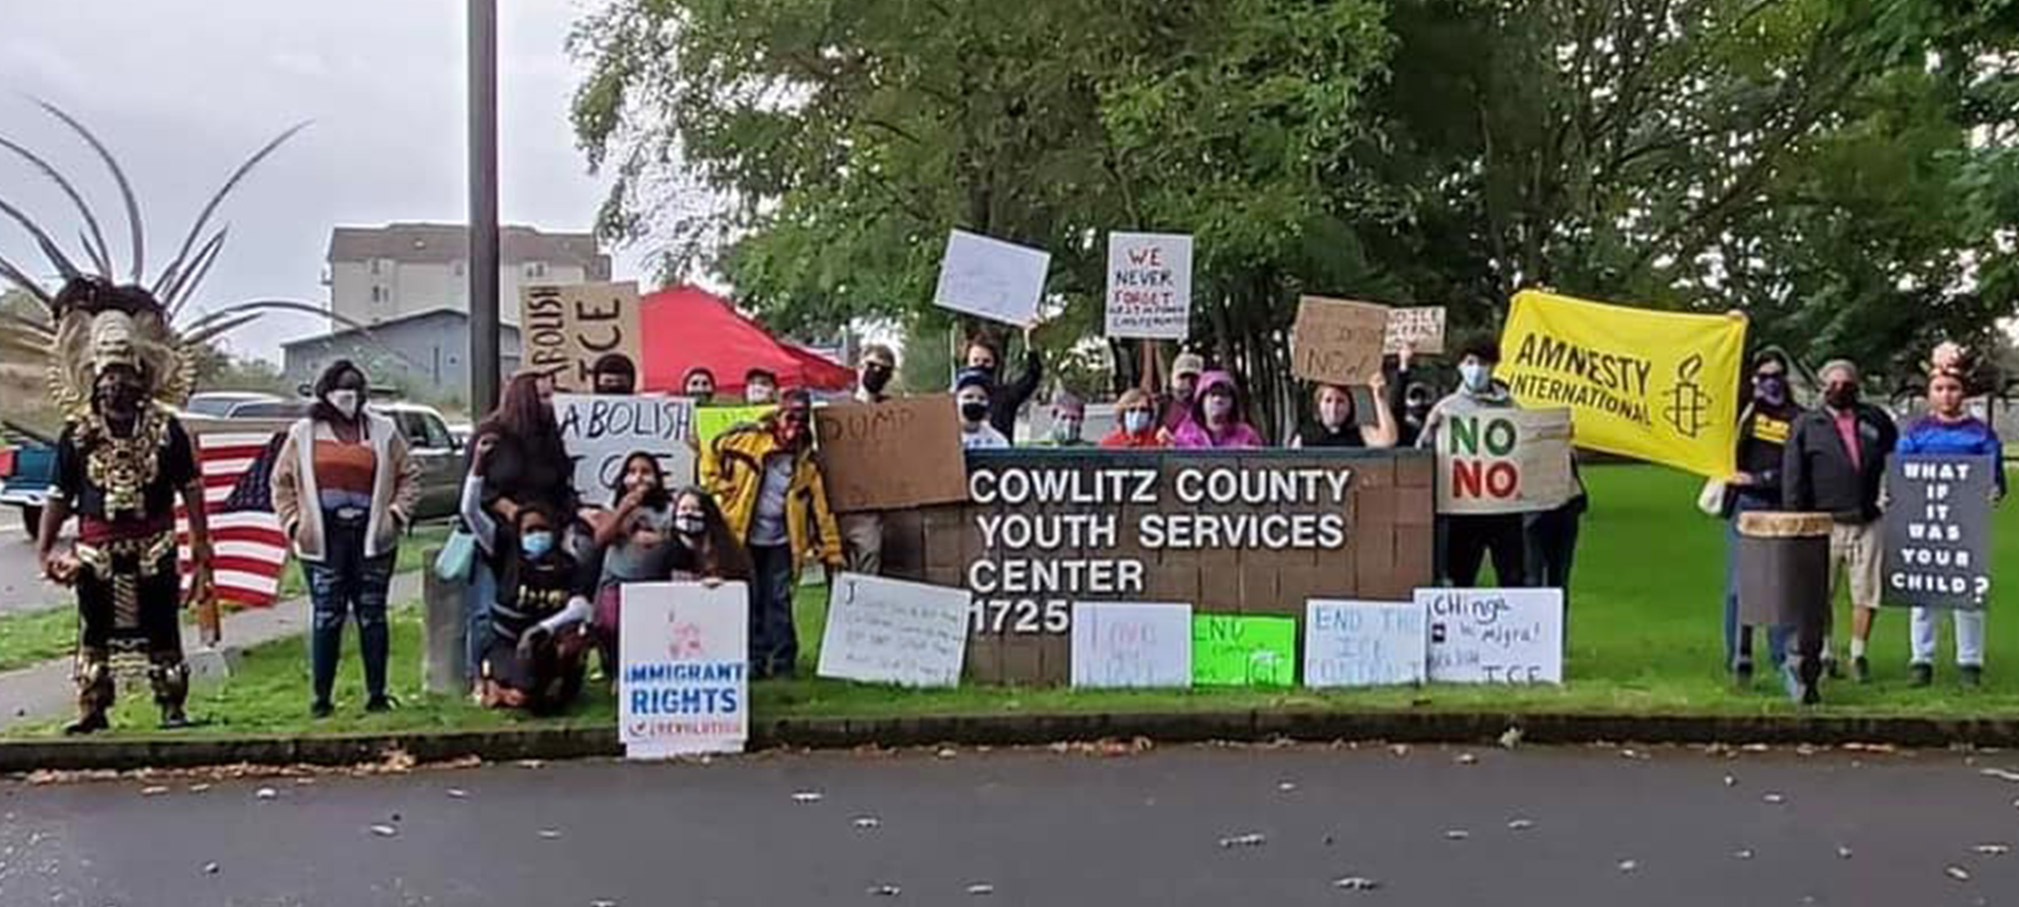 Protest outside of Cowlitz County Youth Services Center